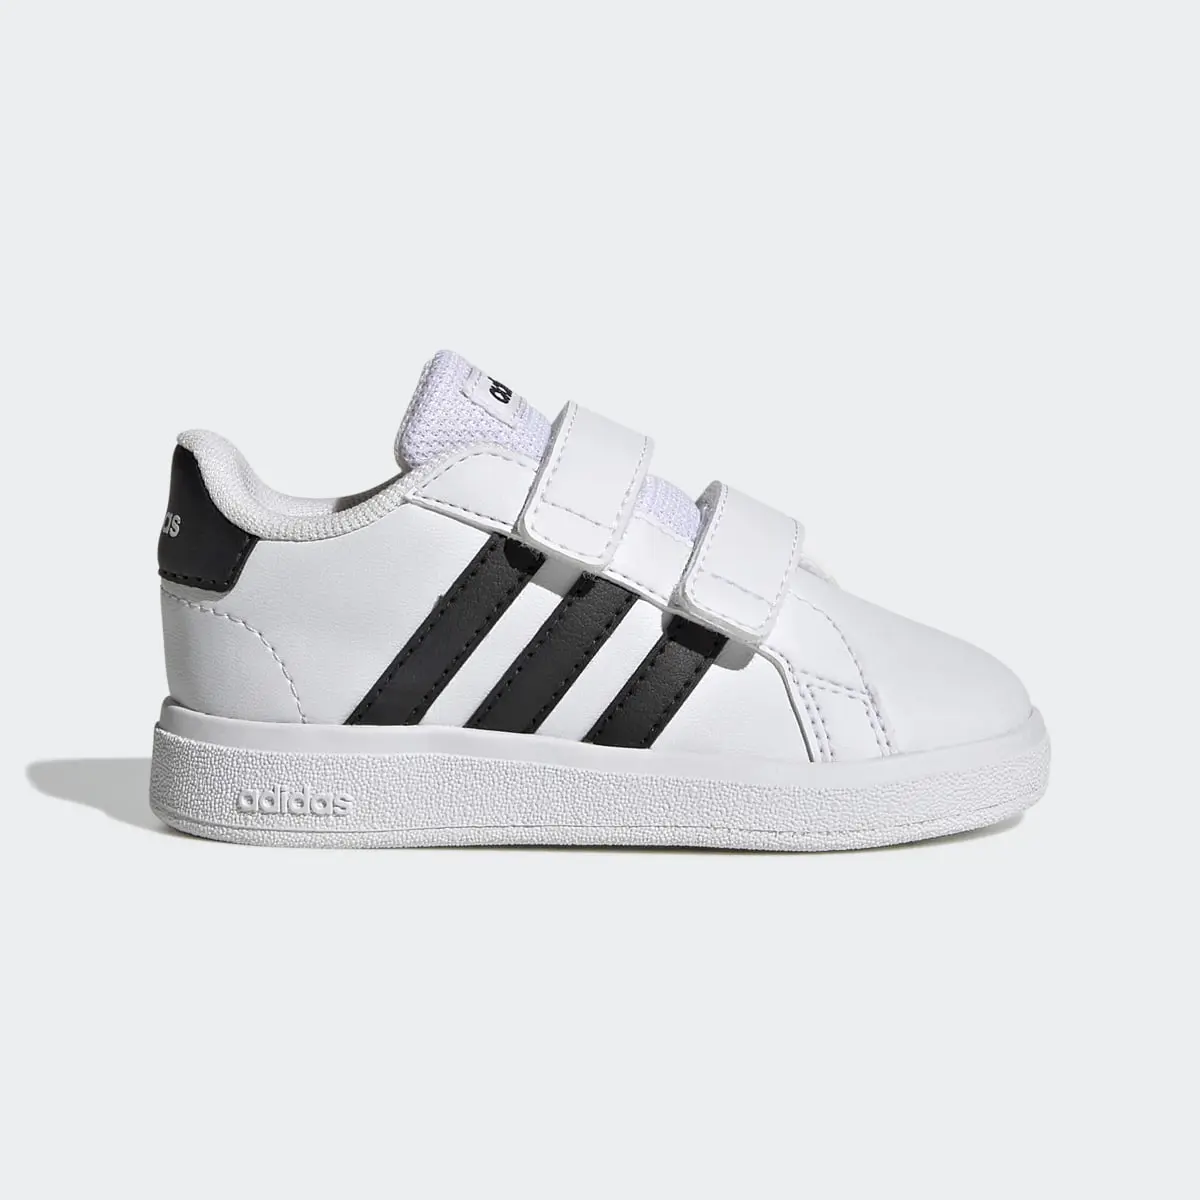 Adidas Grand Court 2.0 Shoes. 2